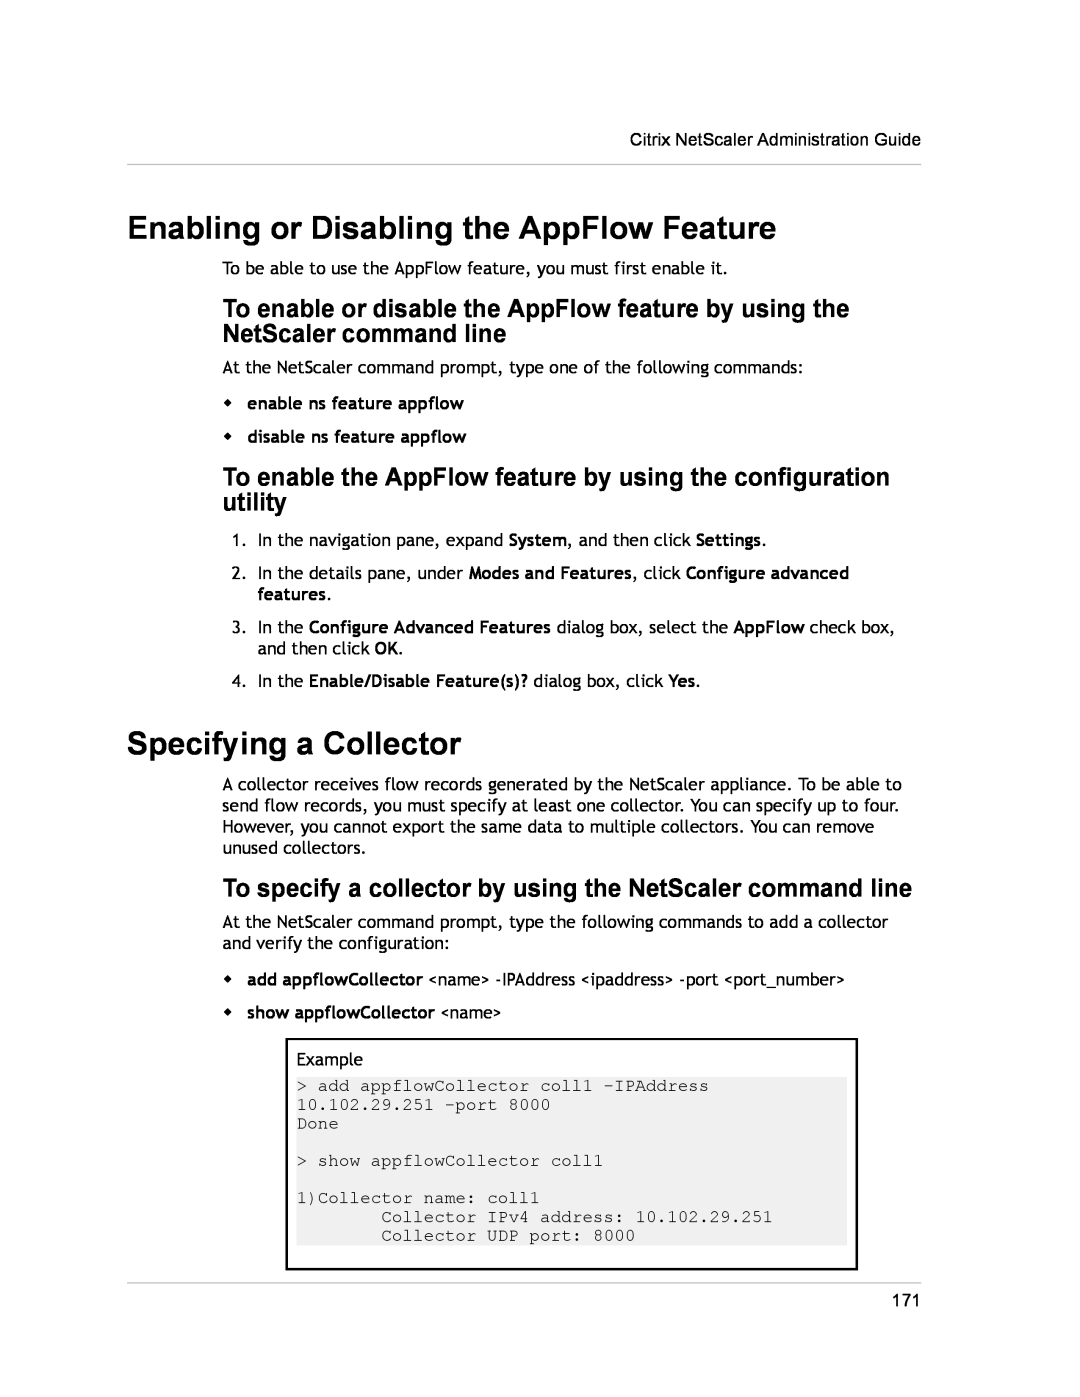 Citrix Systems CITRIX NETSCALER 9.3 manual Enabling or Disabling the AppFlow Feature, Specifying a Collector 